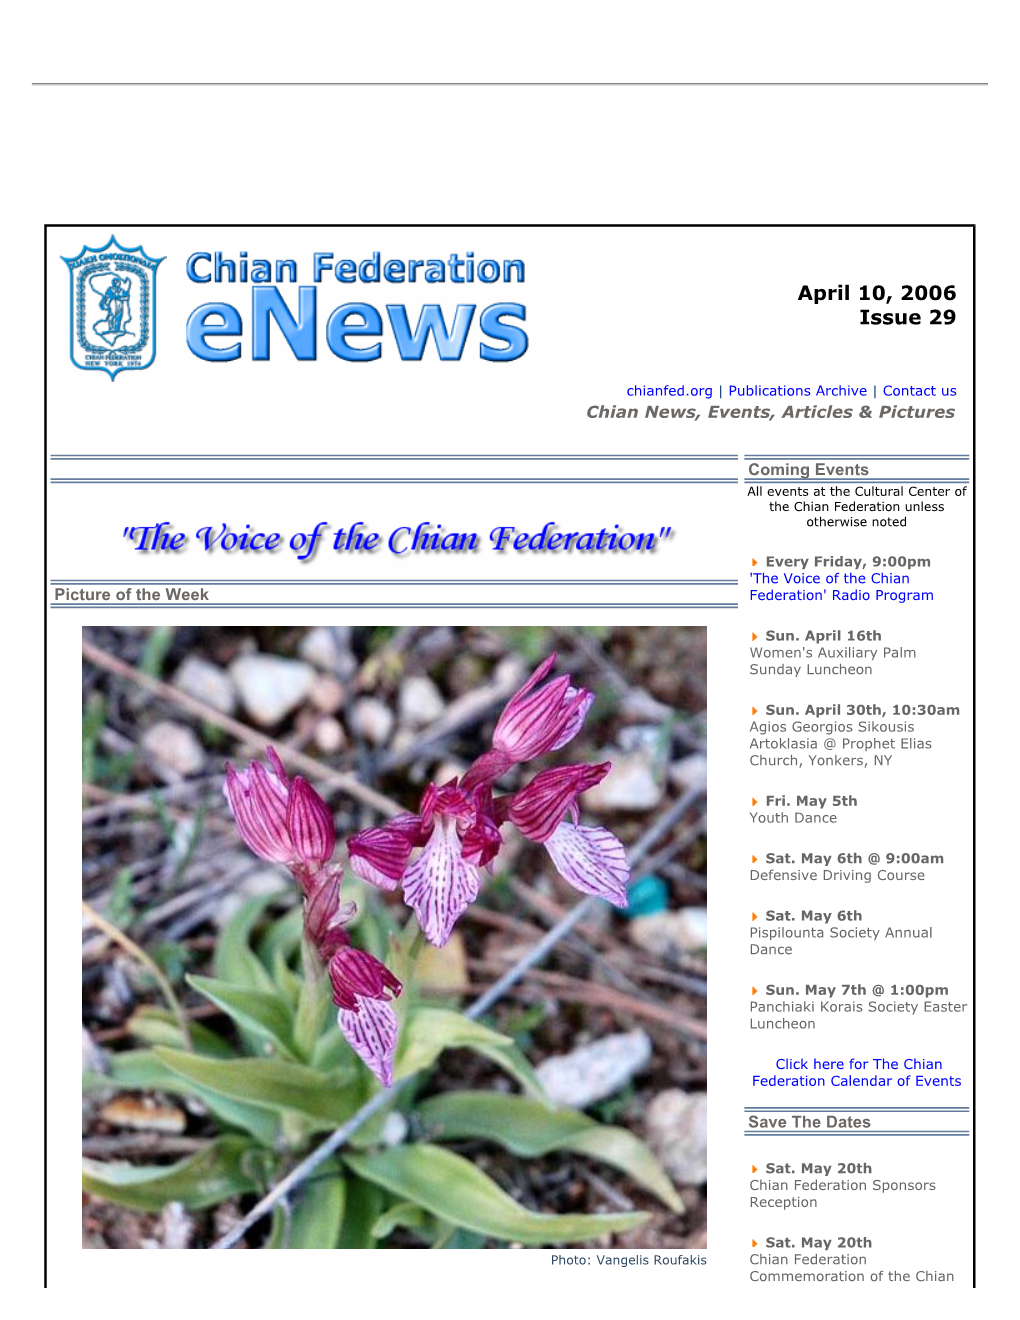 E-News from the Chian Federation